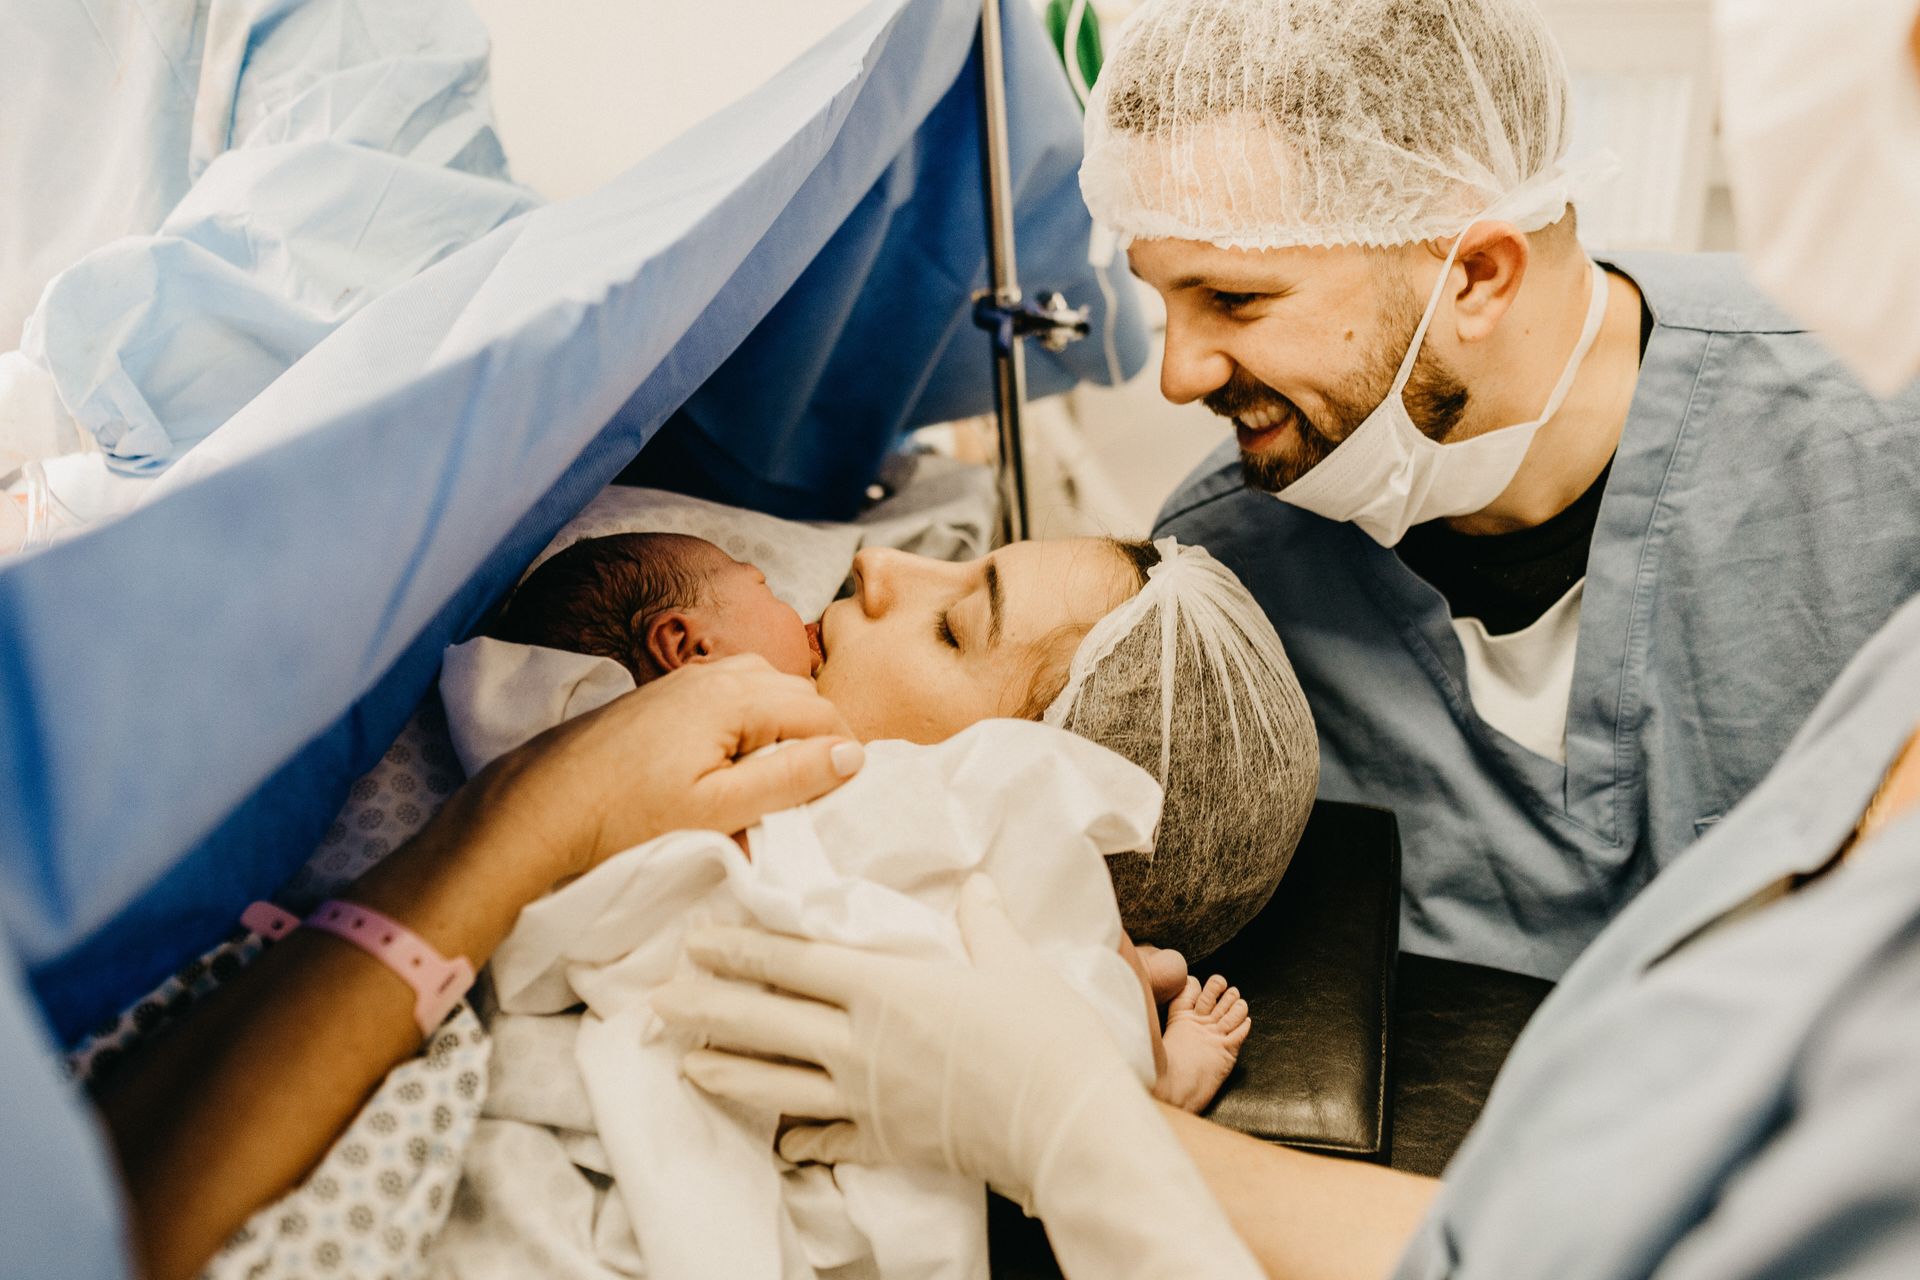 Dad looking on as baby brought to Mom after C-section